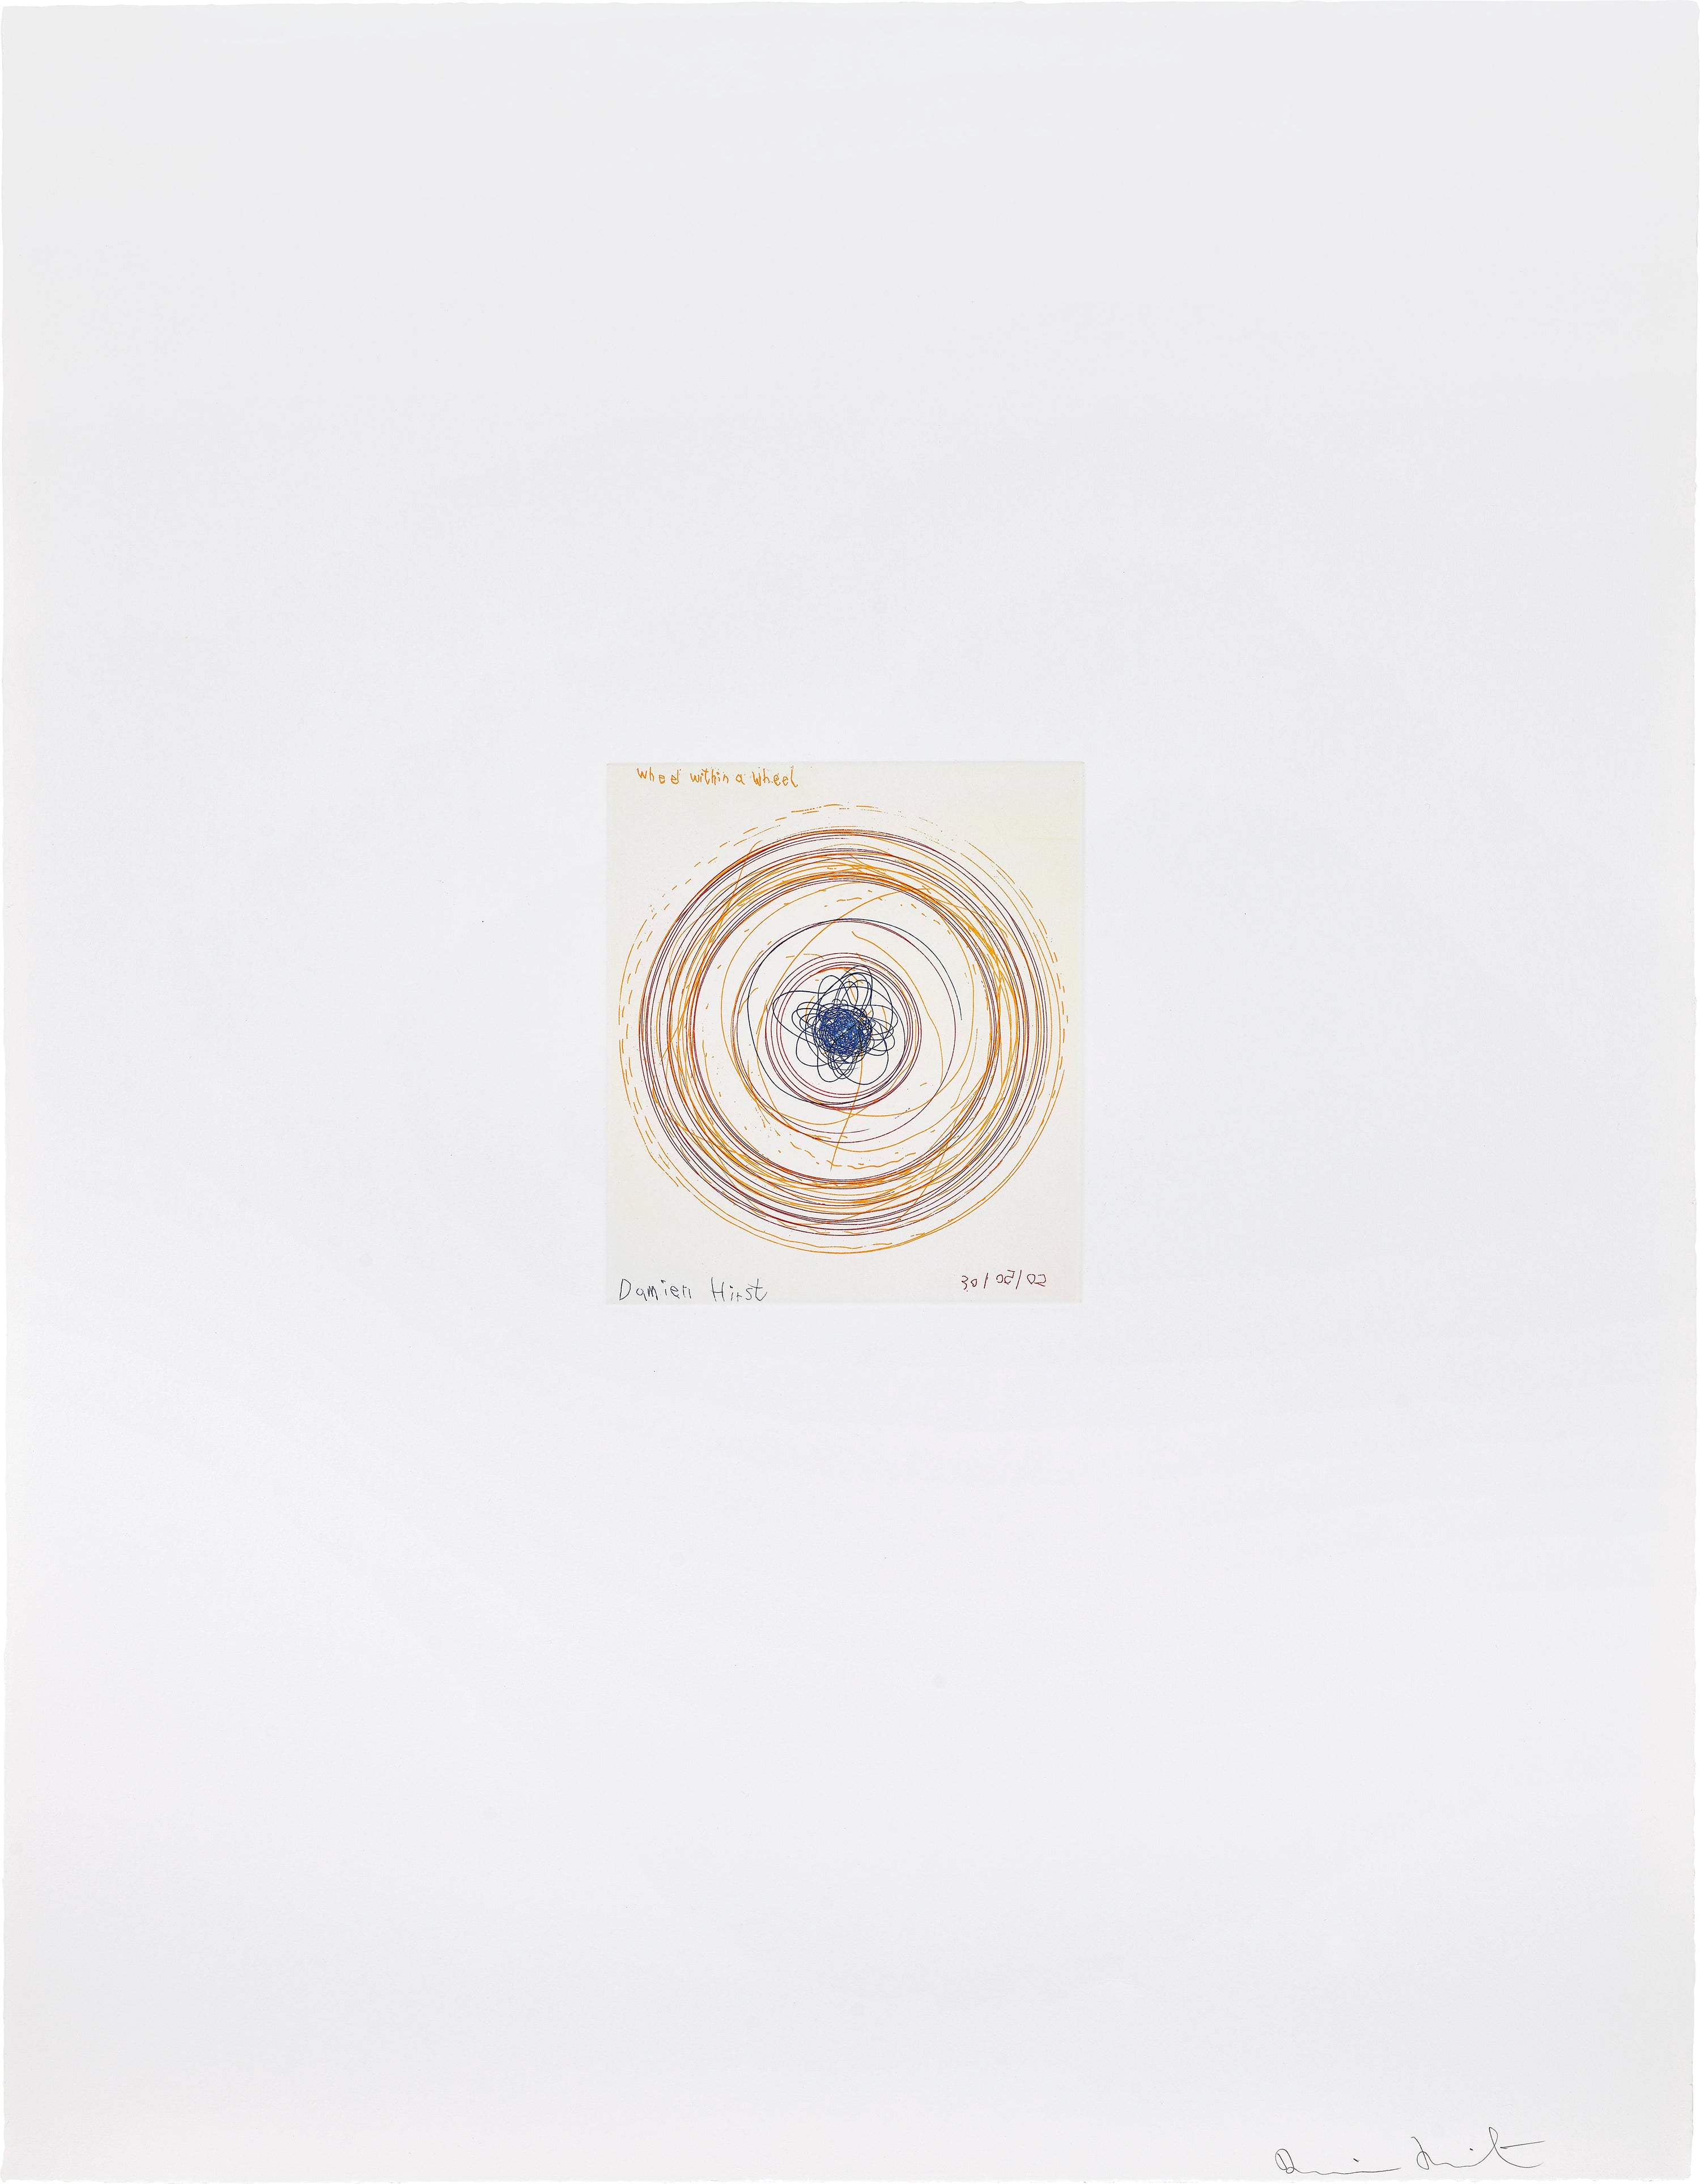 Wheel within a wheel (In a Spin, the Action of the World on Things, Volume I), 2002